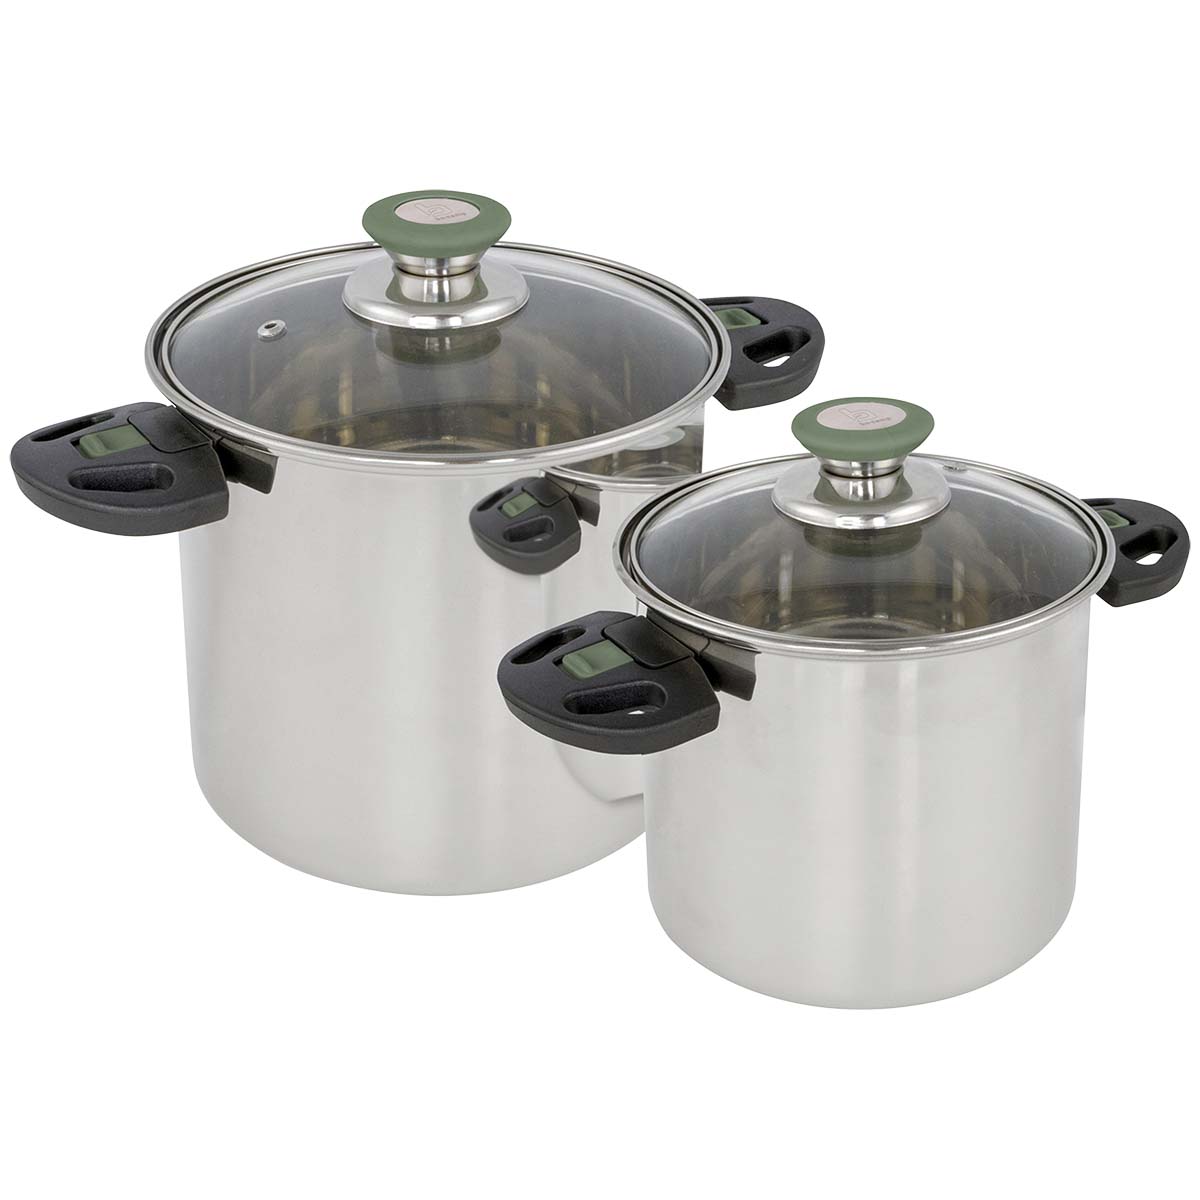 2100930 A luxurious 2-part stainless steel cookware set. Every pan has a glass lid with heat-resistant knob. In addition, every pan has heat-resistant and retractable hand grips. These hand grips can be easily folded after use so that the pans are fully nestable and compact to store. Save up to 40% space! The pans are narrow and high and thereby extremely suitable for the limited space on gas burners Can be used on gas, ceramic and electrical heat sources. Dimensions (Øxh): 14x13 and 18x17 cm. Dimensions nested (Øxh): 18x17 cm. Contents: 2 and 4.3 litre.